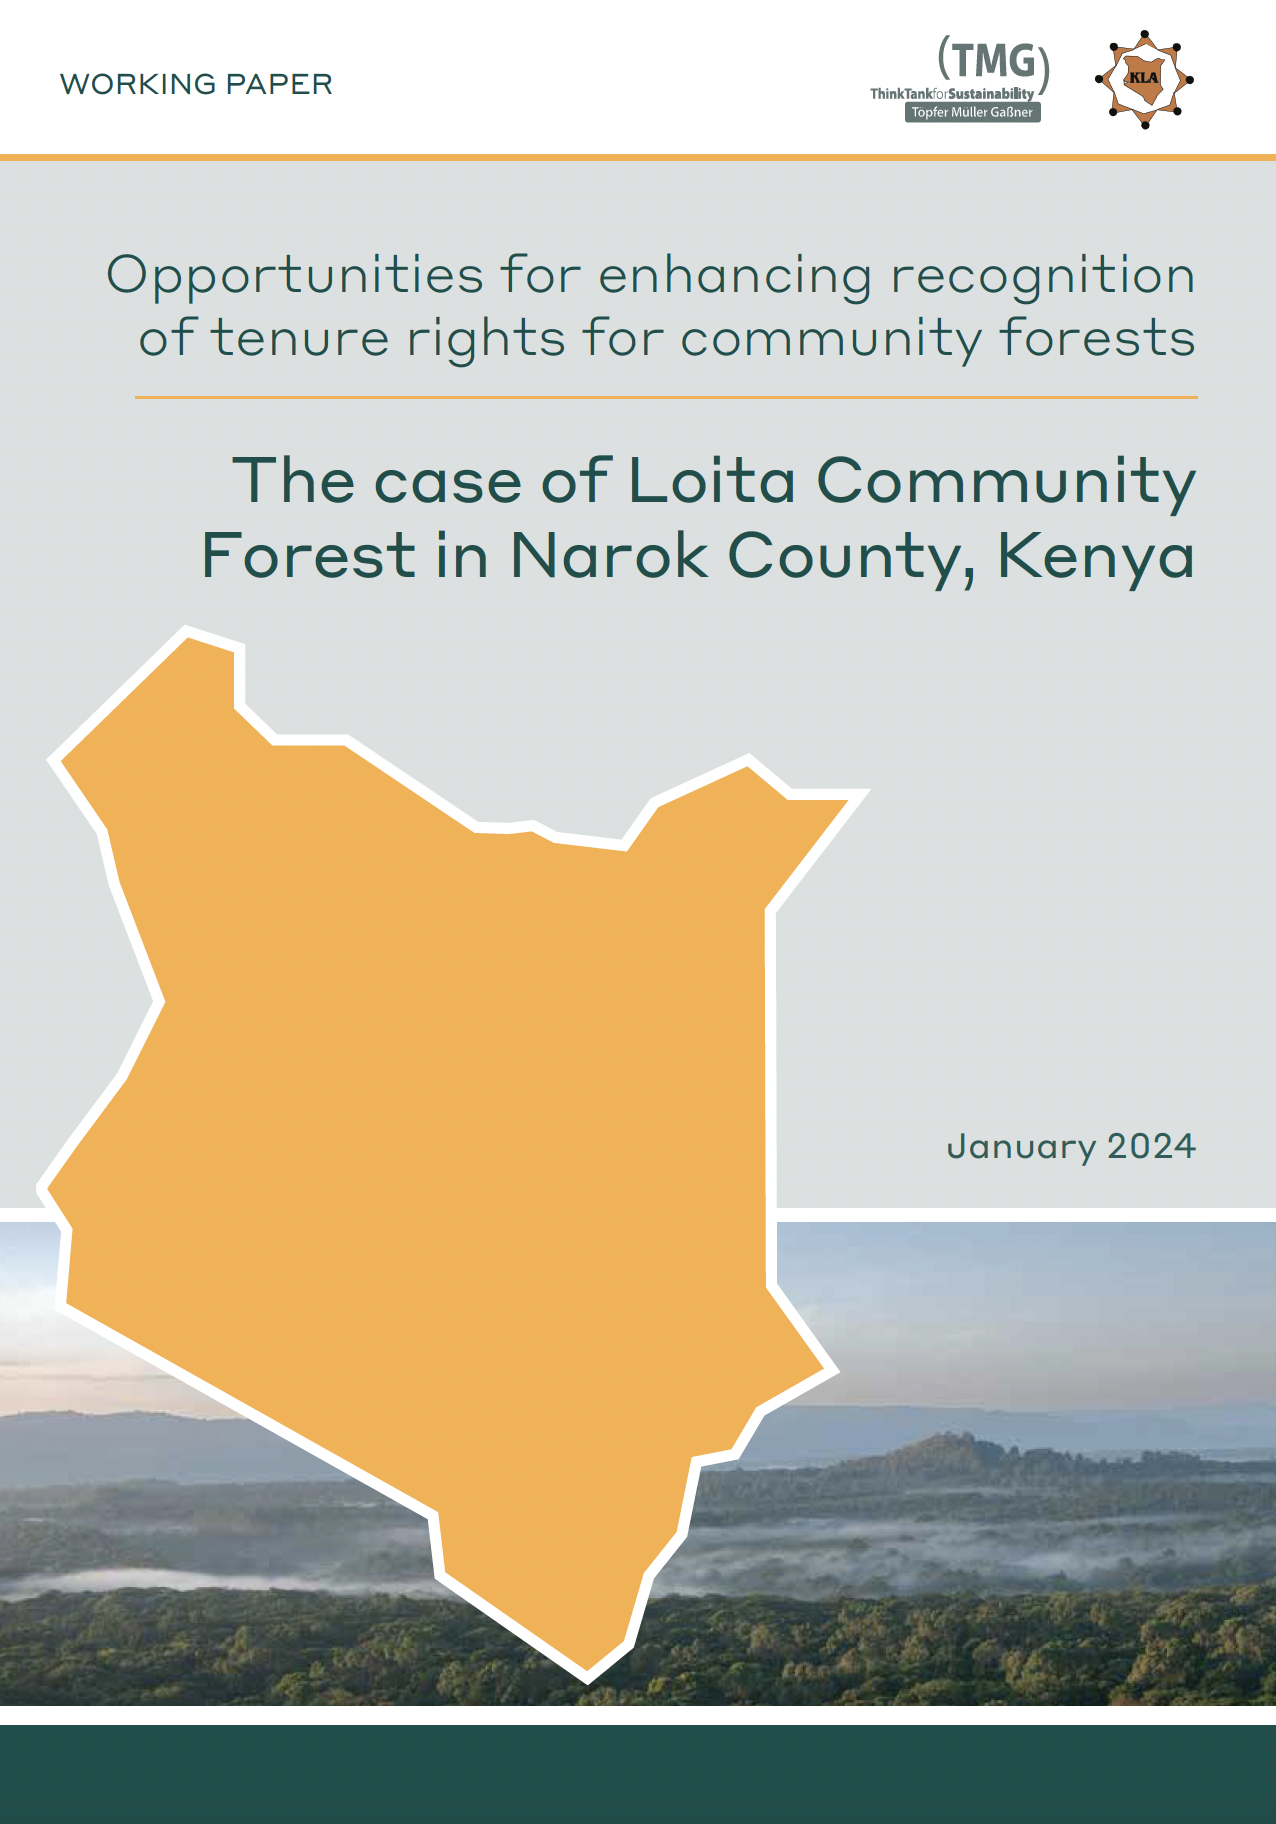 Opportunities for enhancing recognition of tenure rights for community forests: The case of Loita Community Forest in Narok County, Kenya